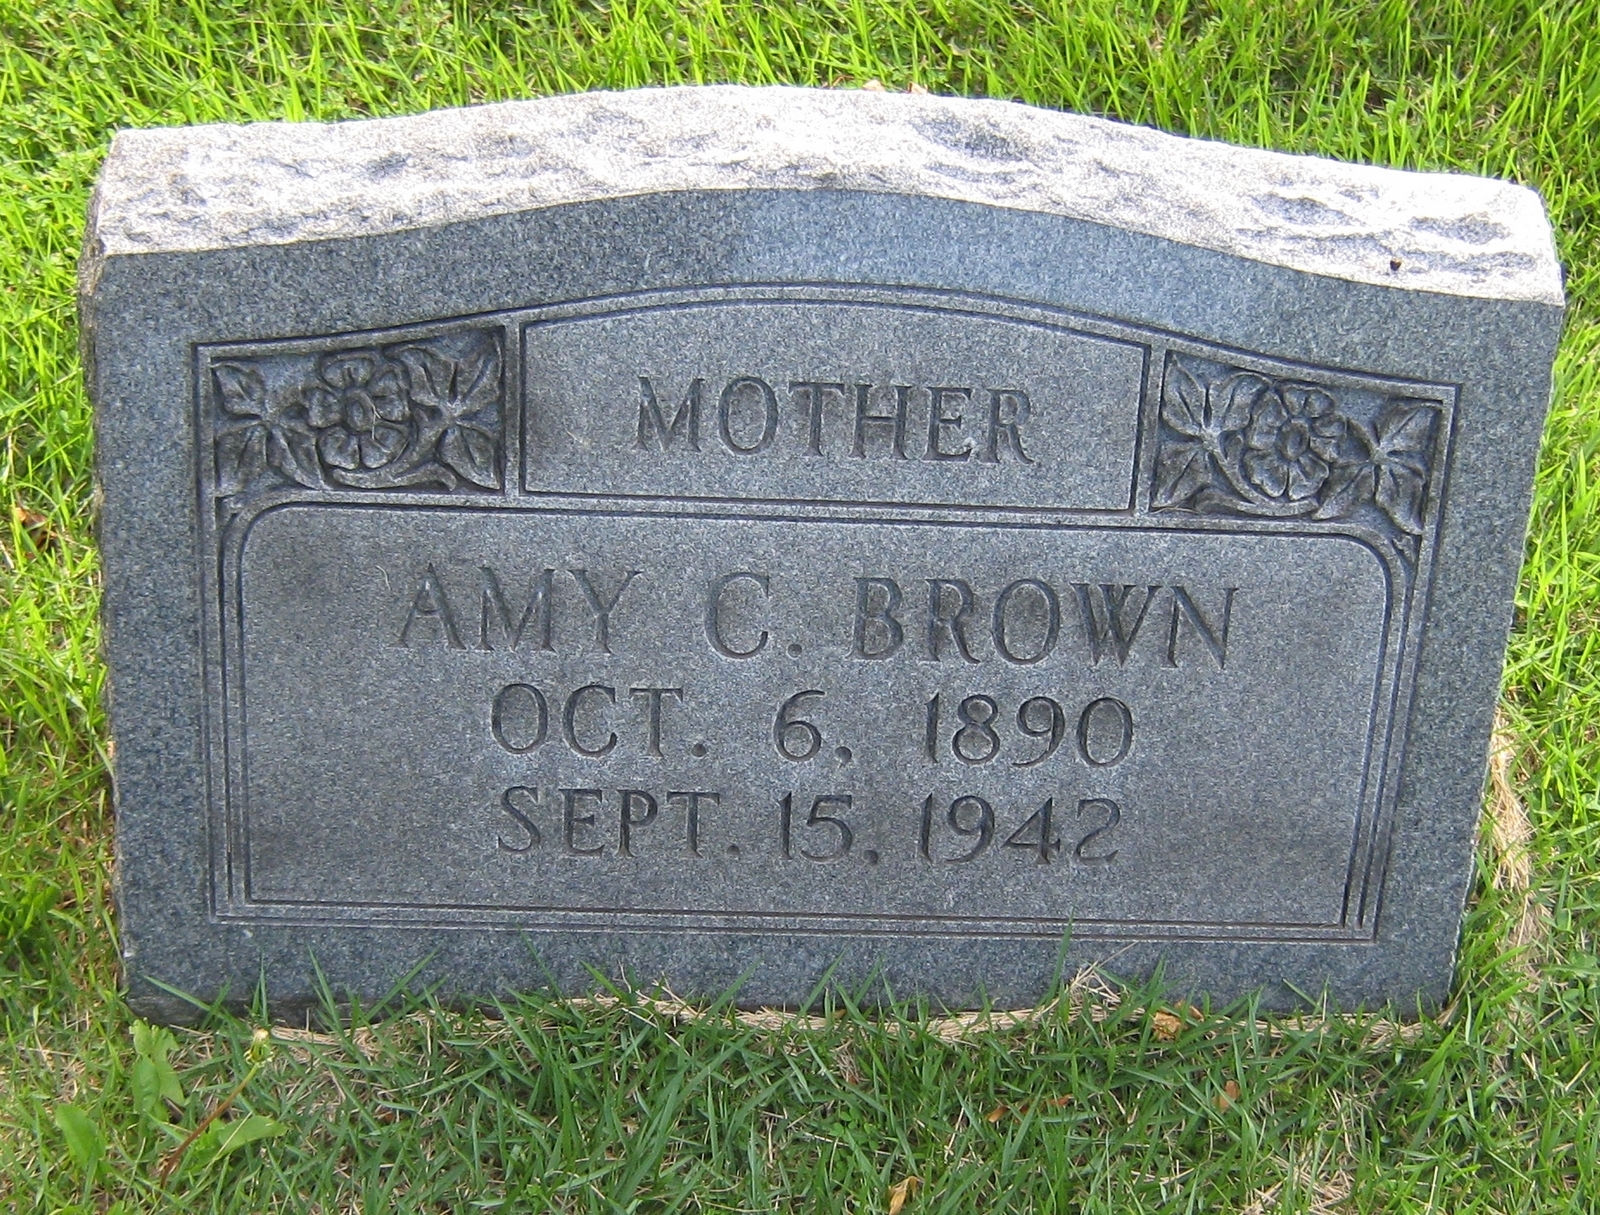 Amy C Brown